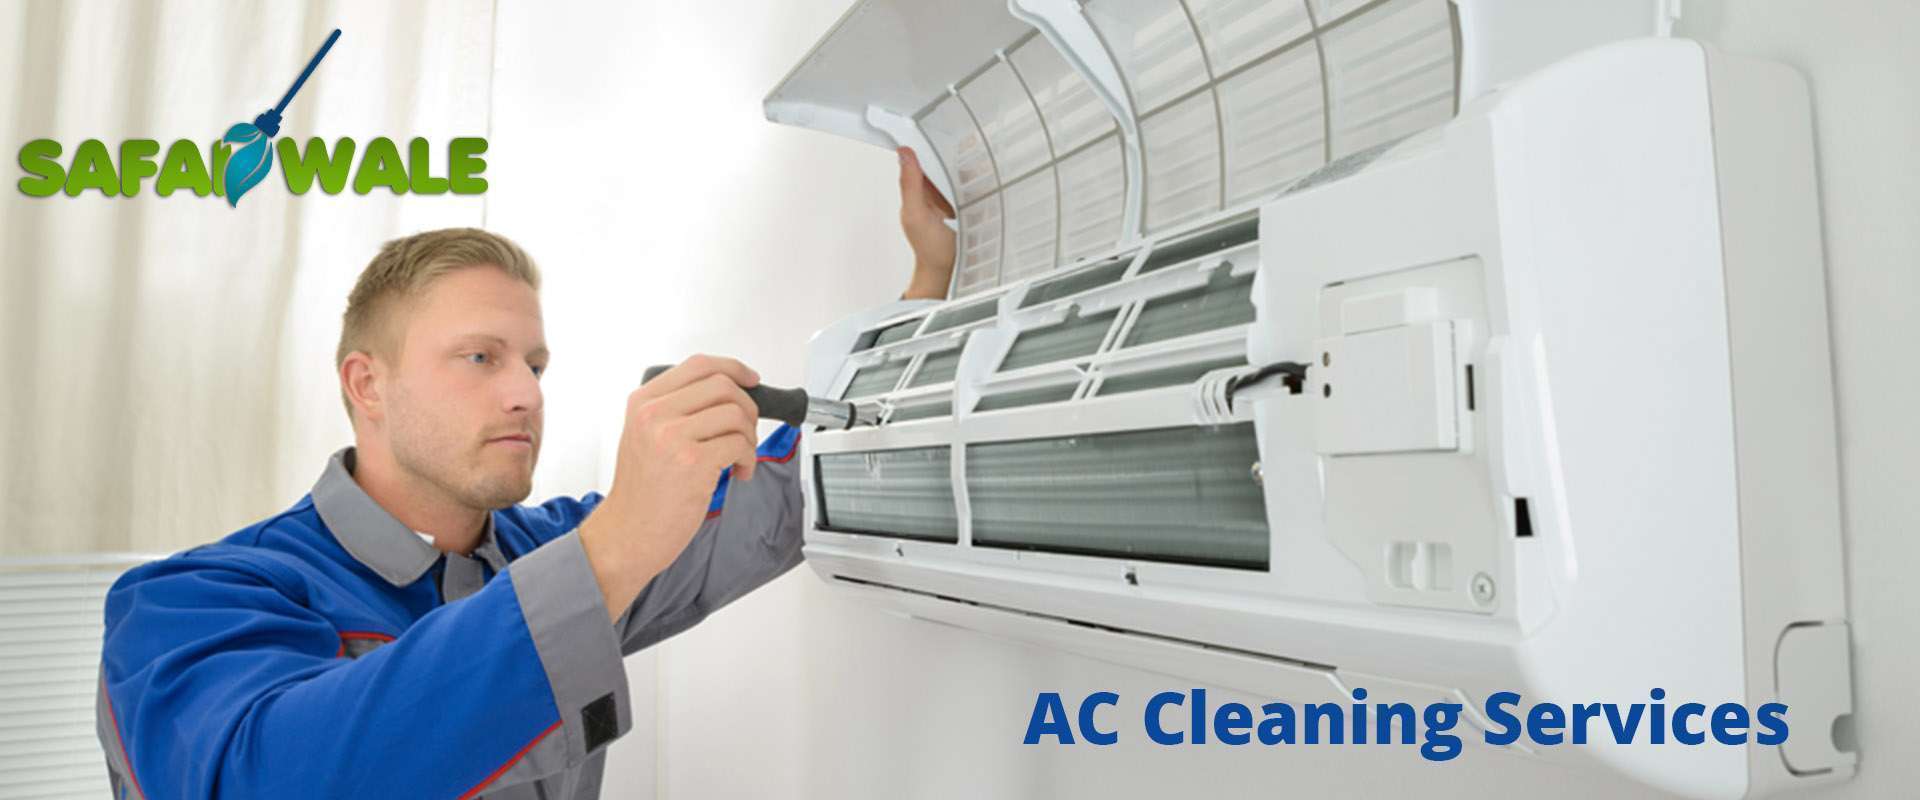 ac cleaning services in Guwahati